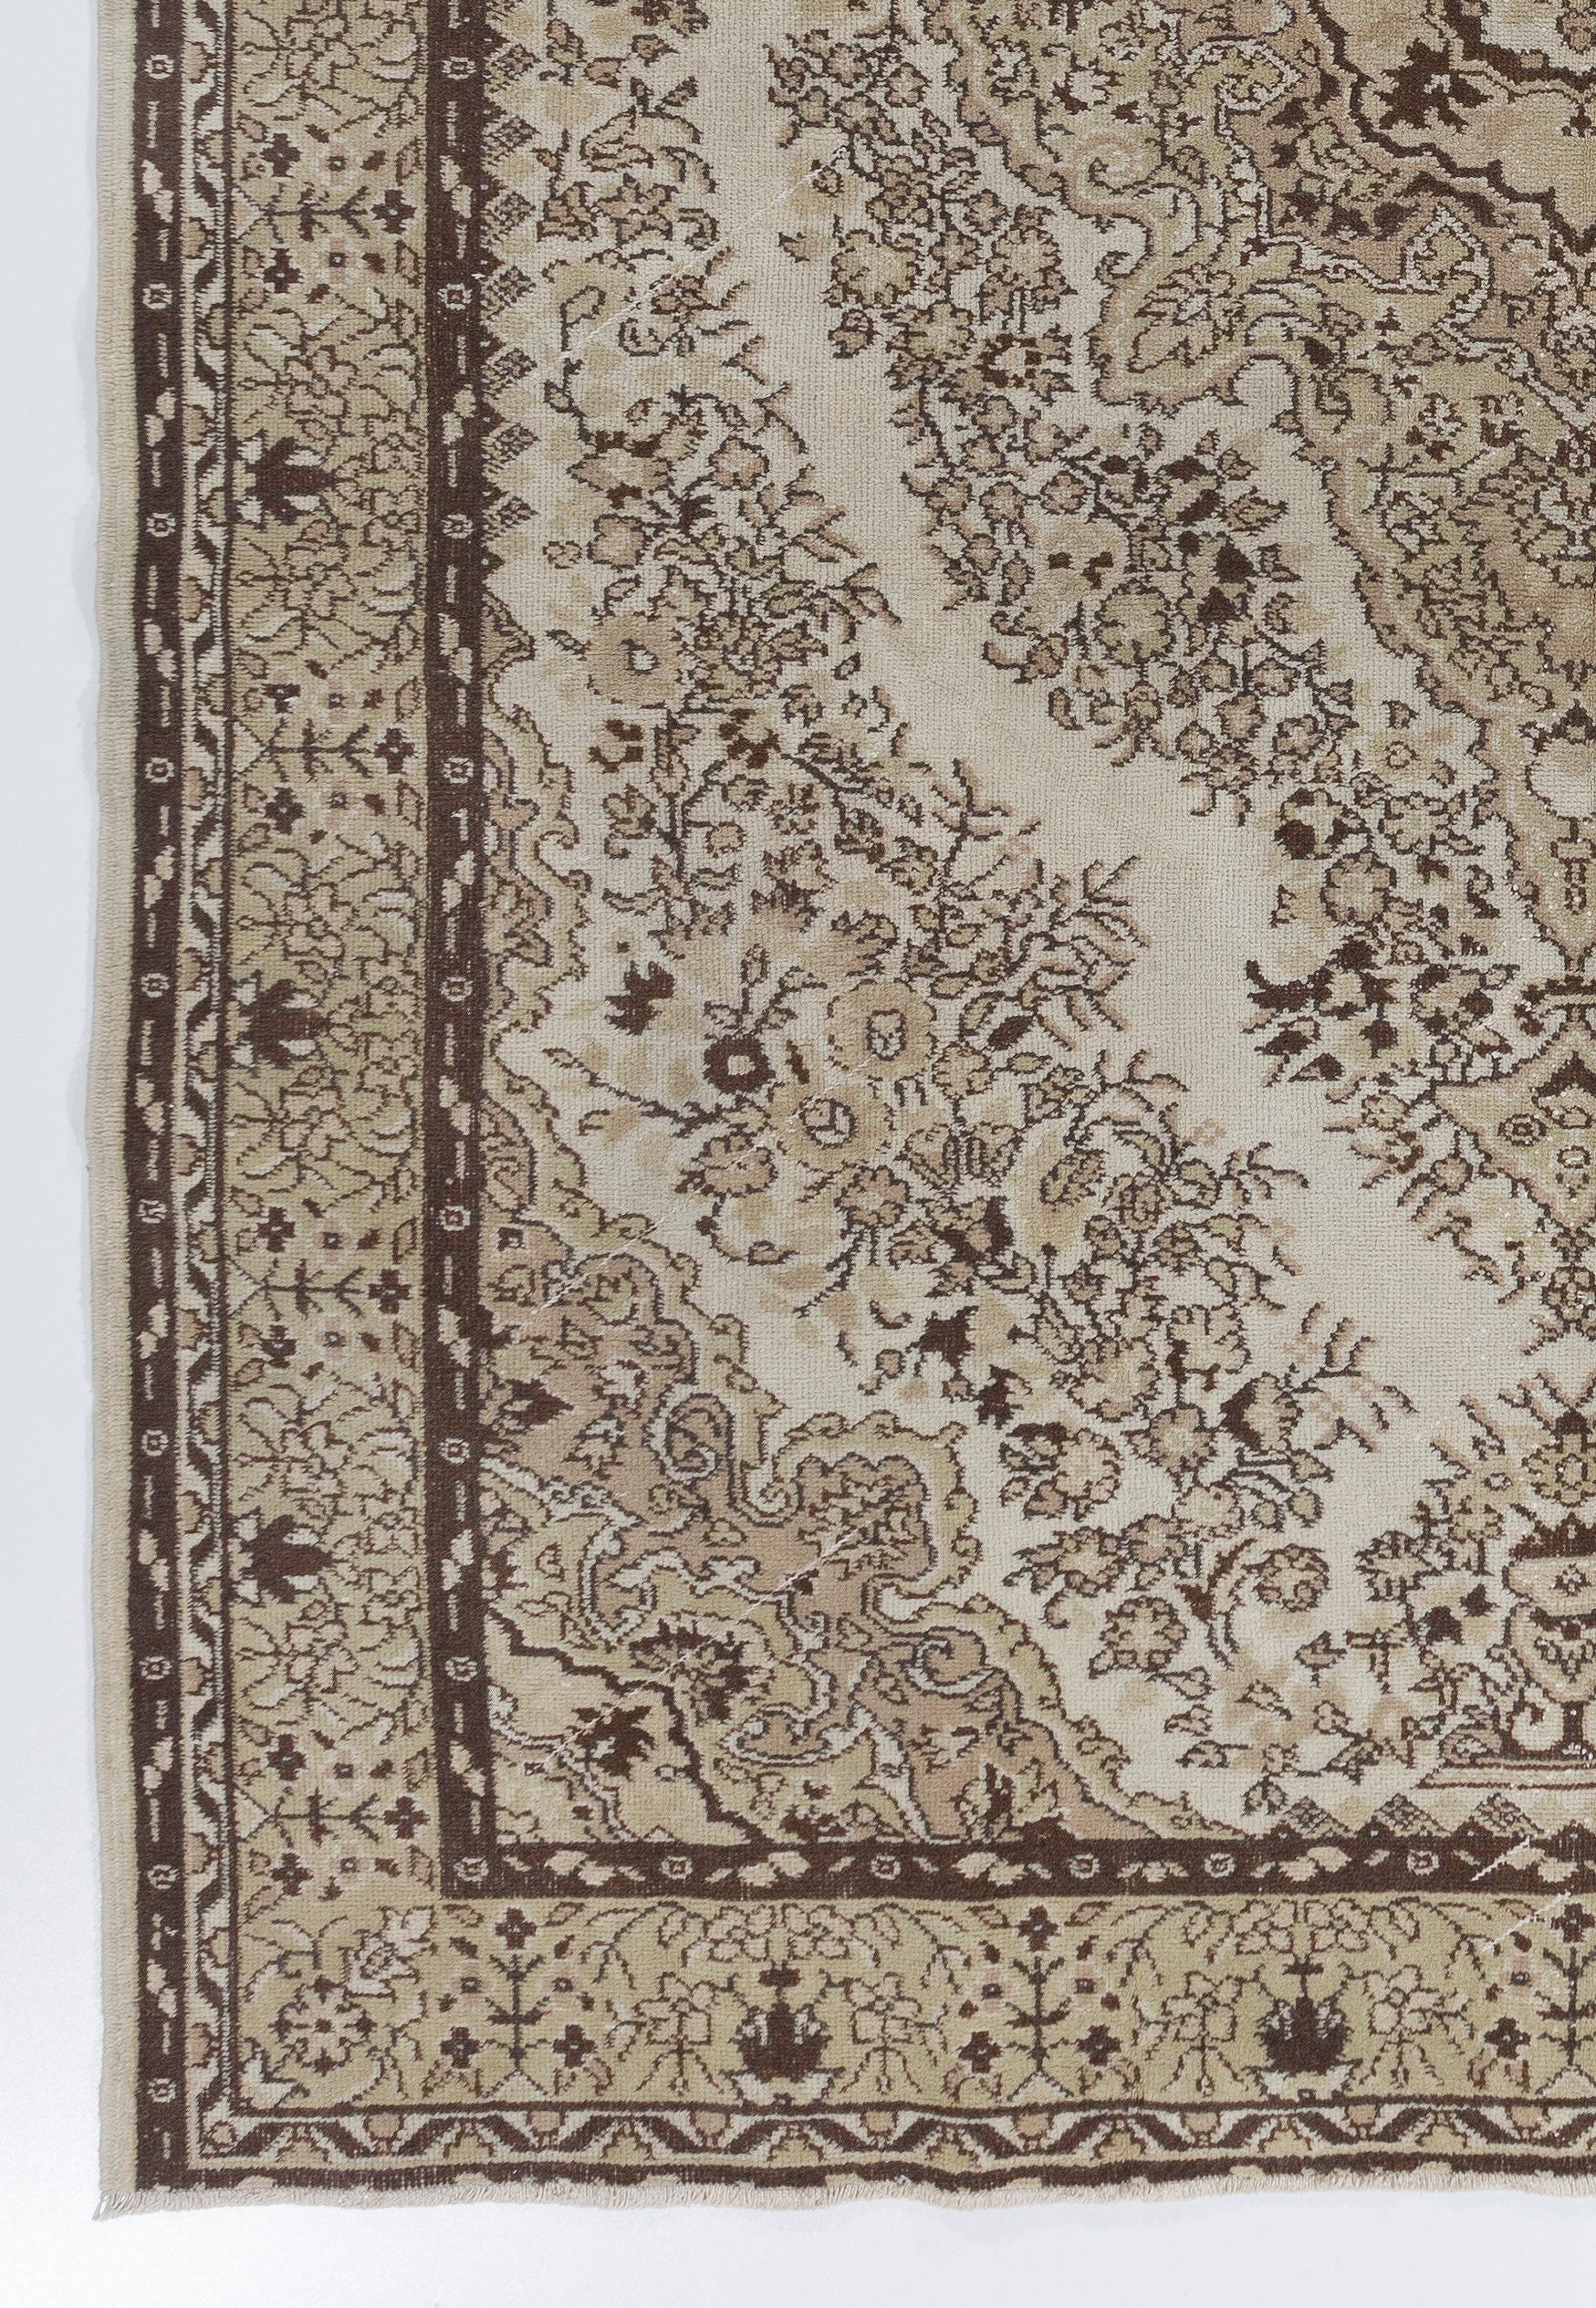 Oushak 7.3x10.5 Ft Handmade Vintage Floral Turkish Wool Area Rug in Neutral Tones For Sale